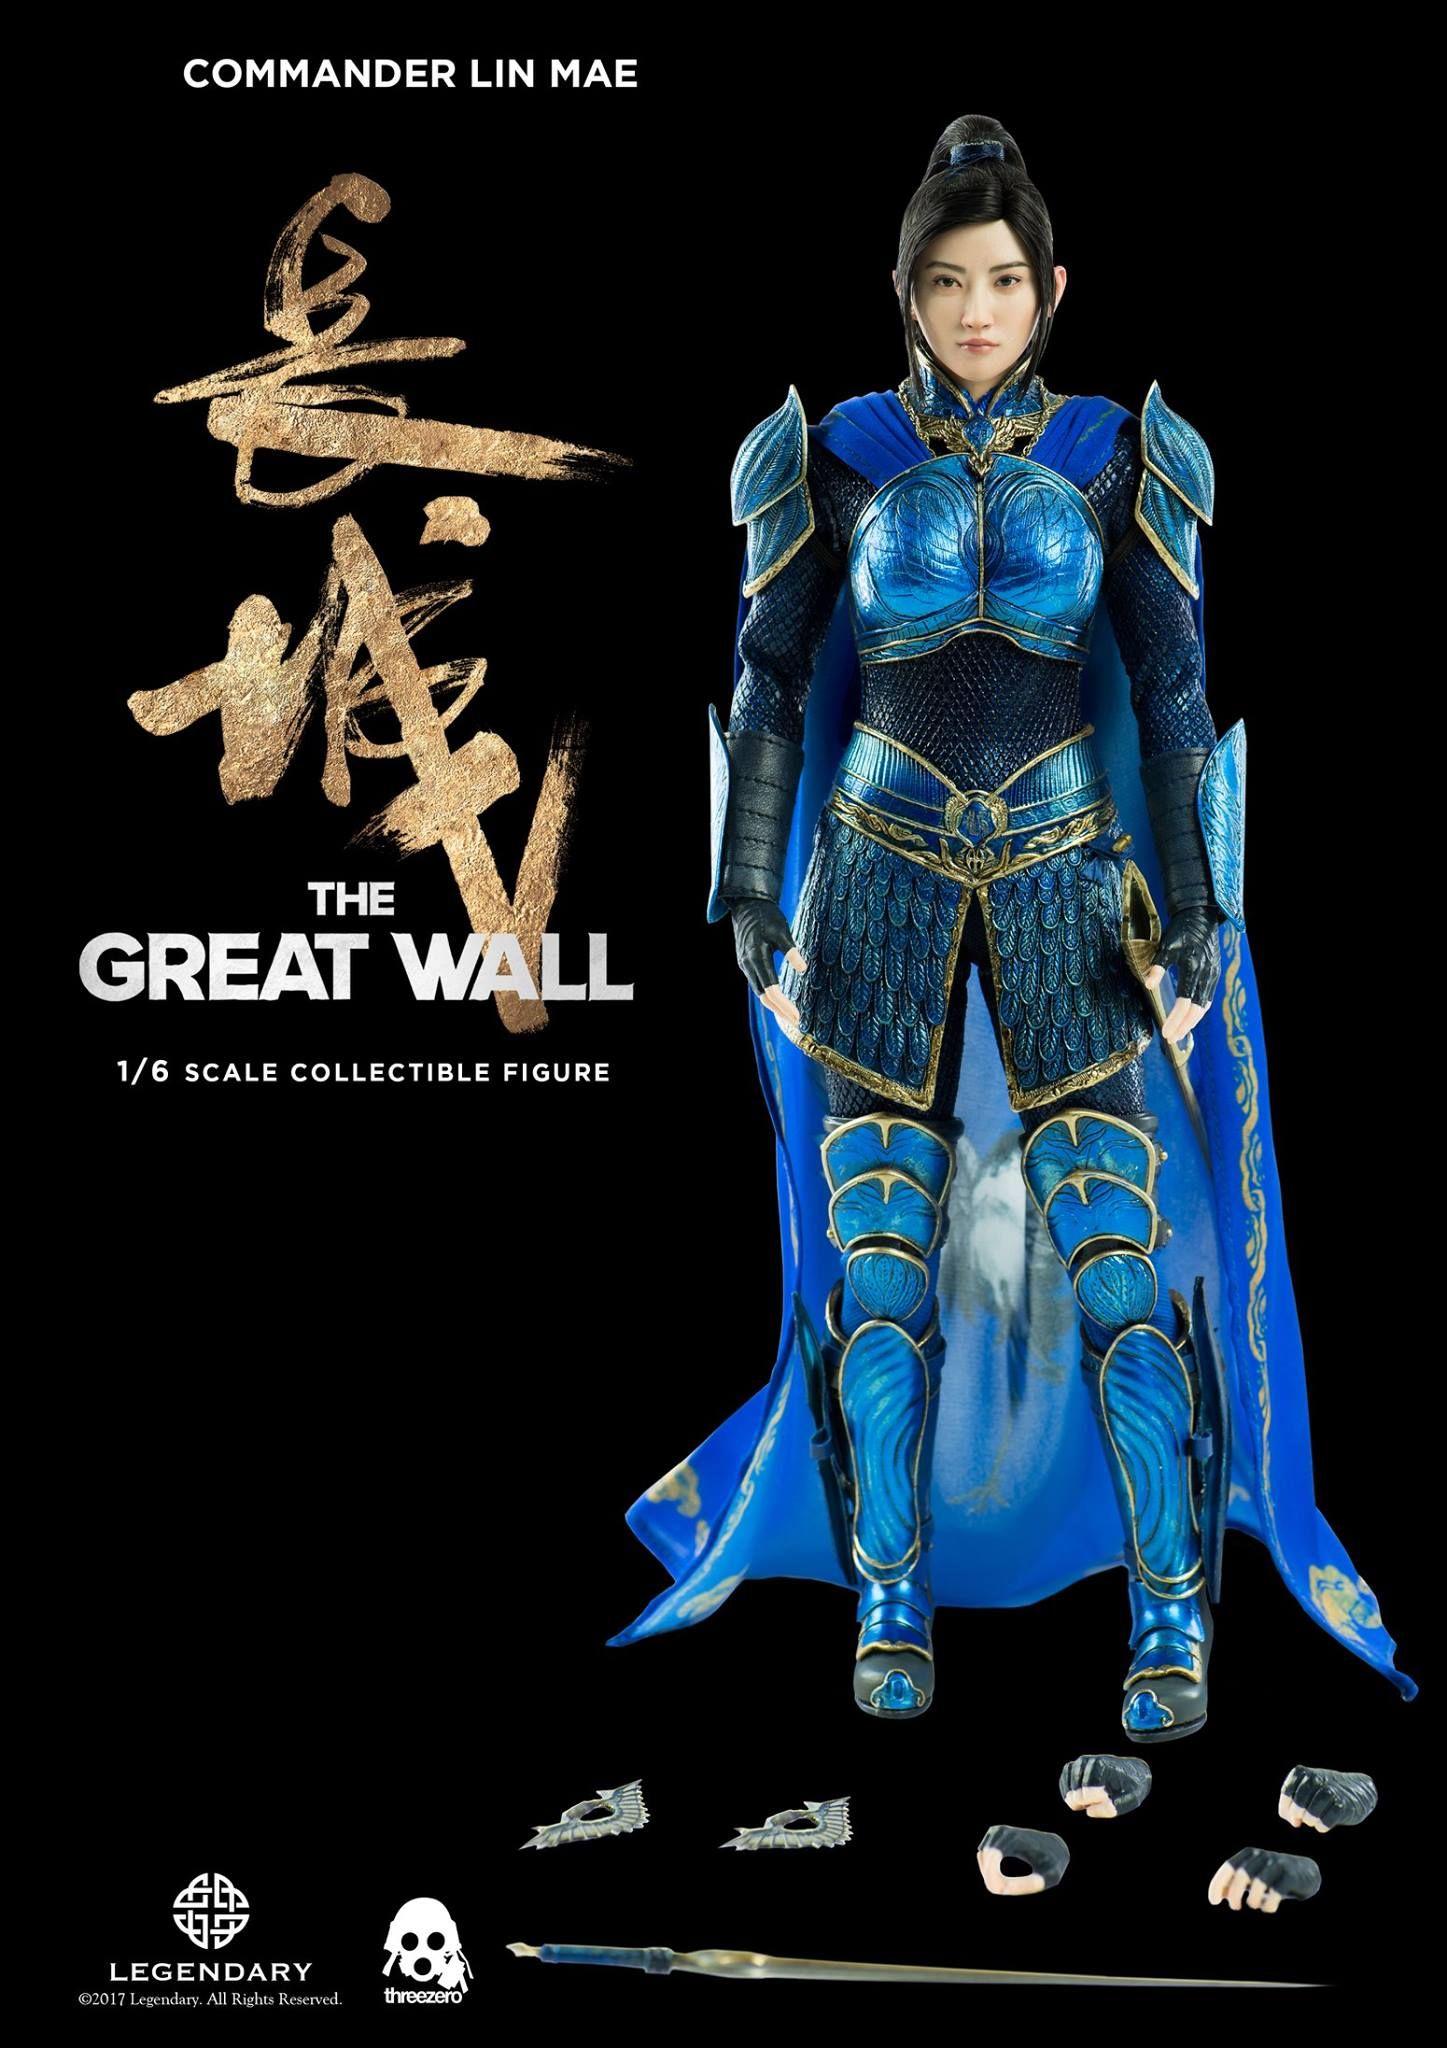 the great wall movie, lin mae. The Great Wall